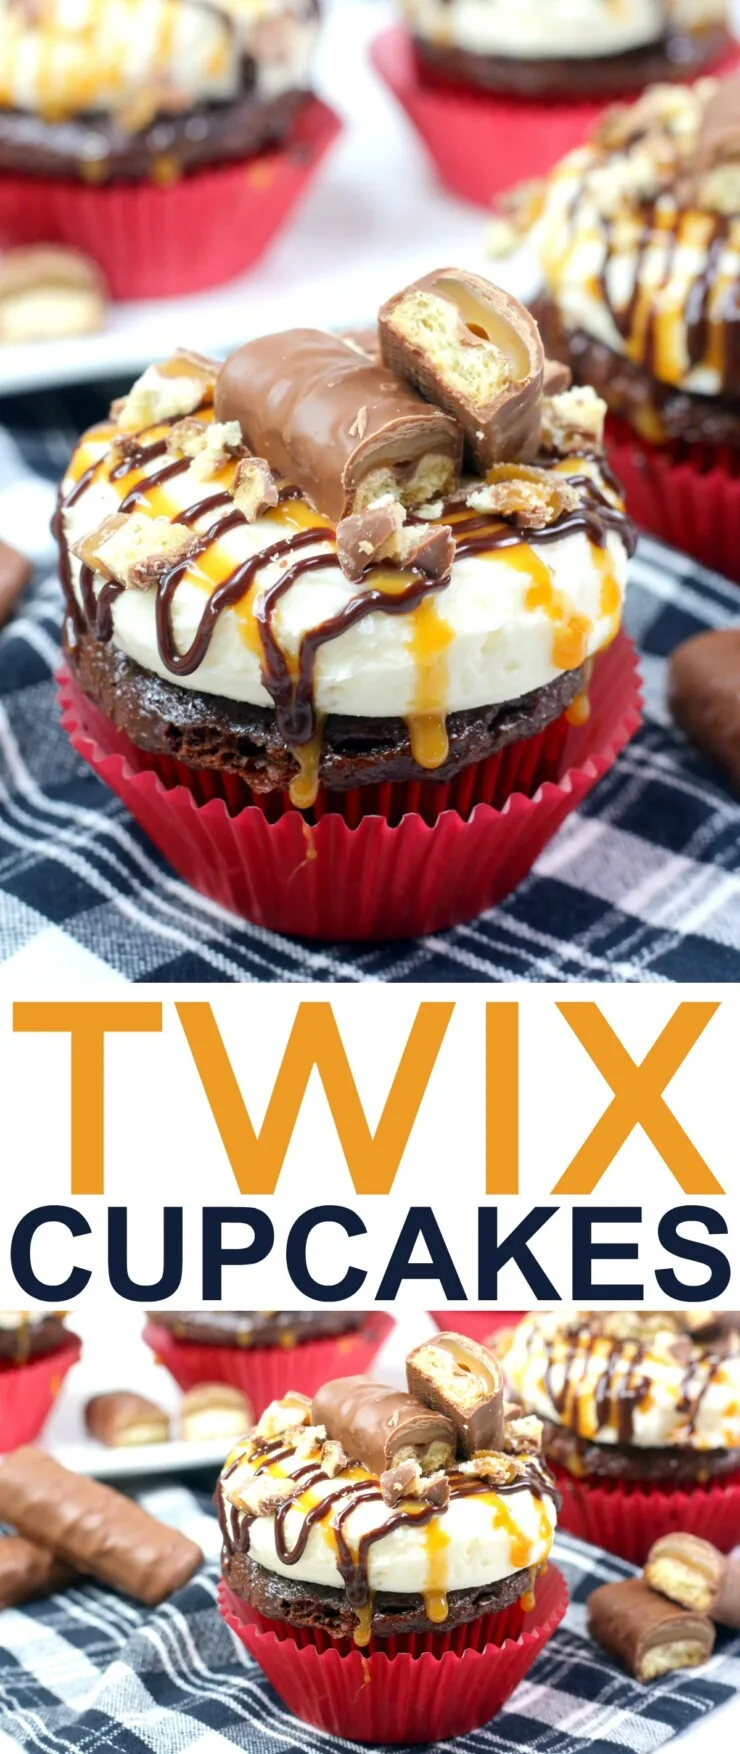 This decadent Twix cupcakes recipe features a from-scratch chocolate cupcake recipe topped with a luscious caramel buttercream.